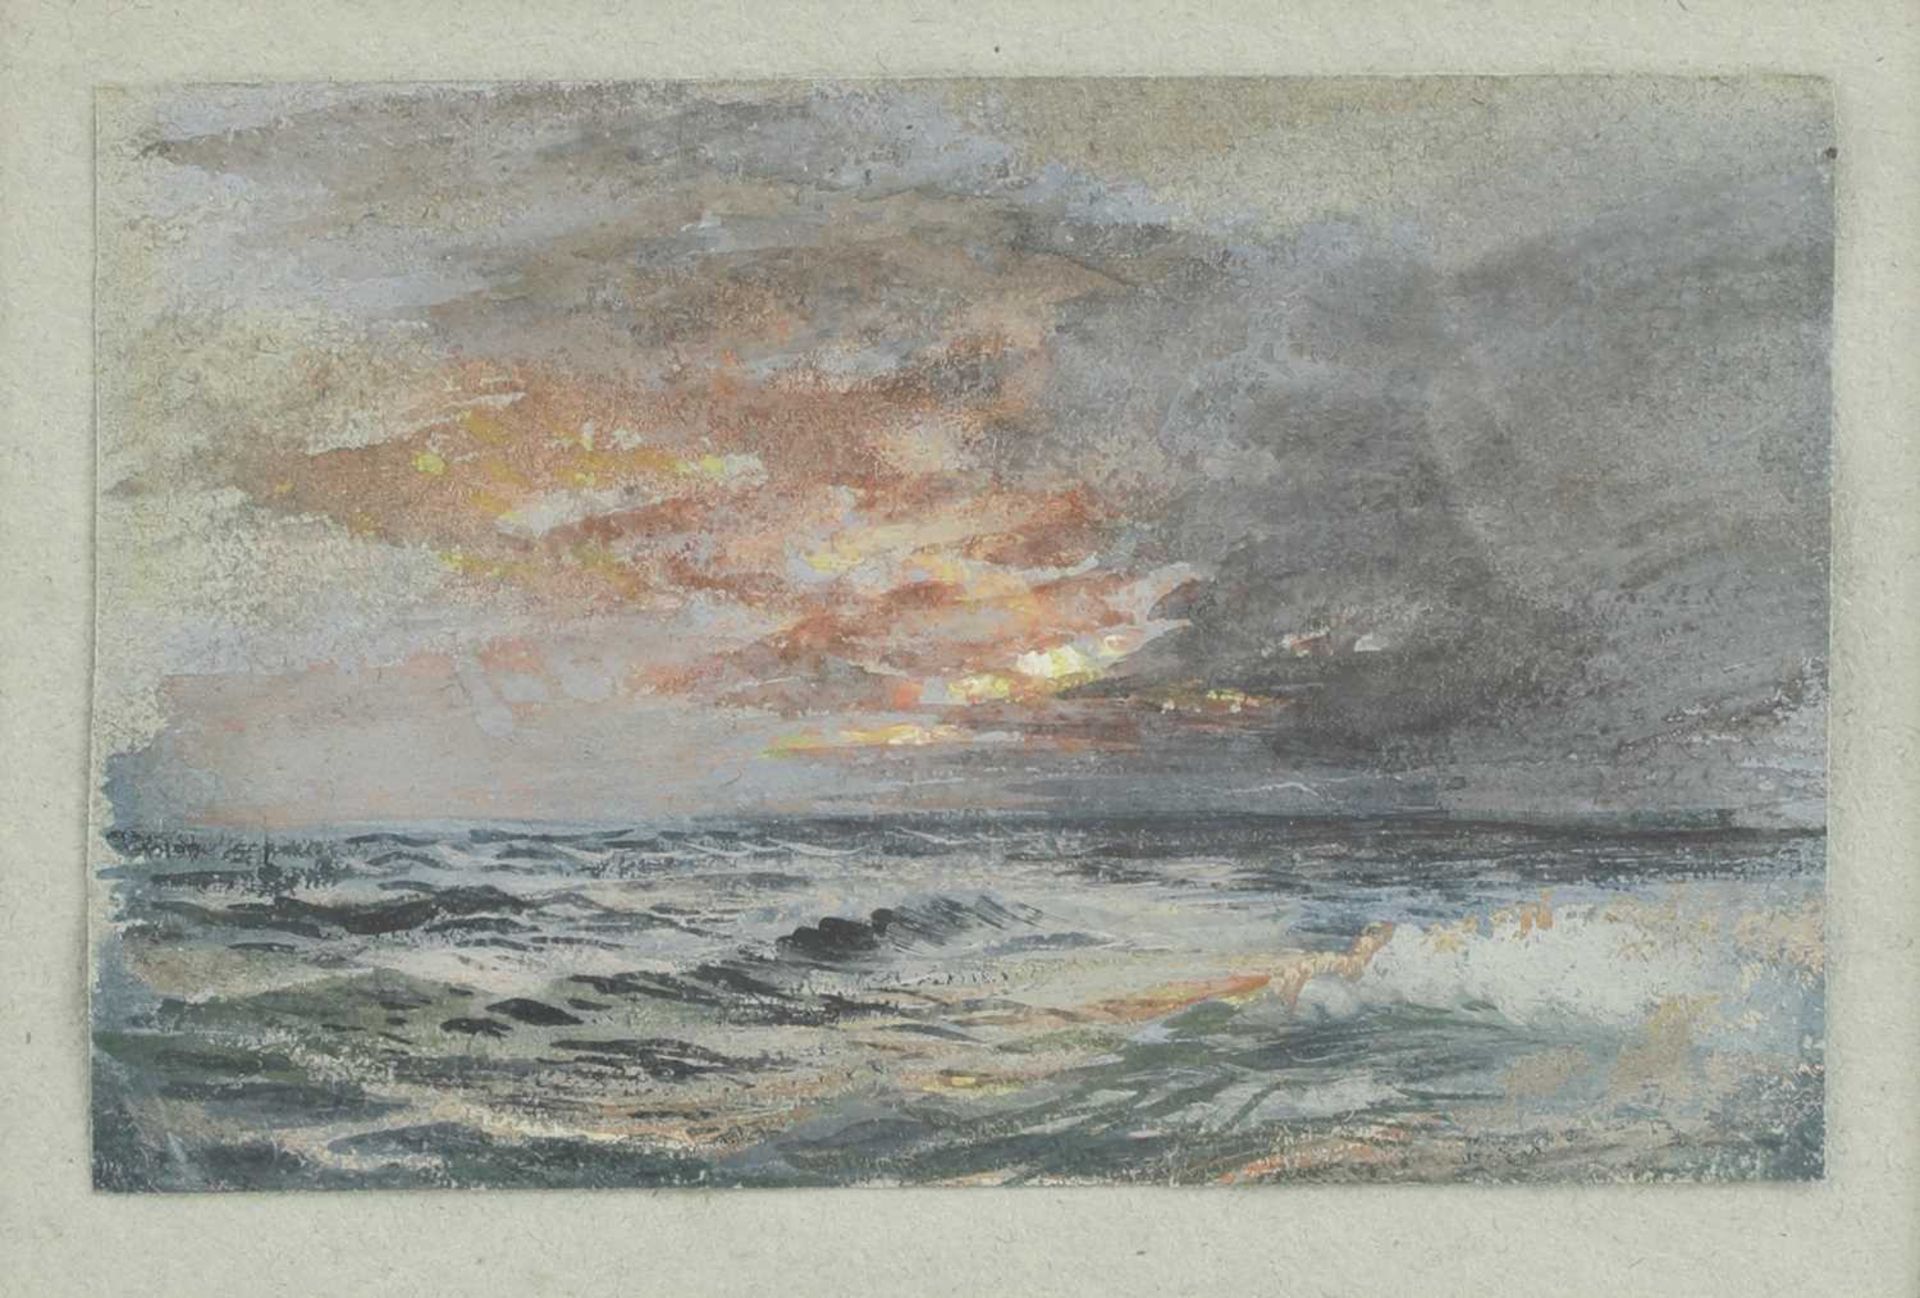 Attributed to Arthur Severn (1842-1931)